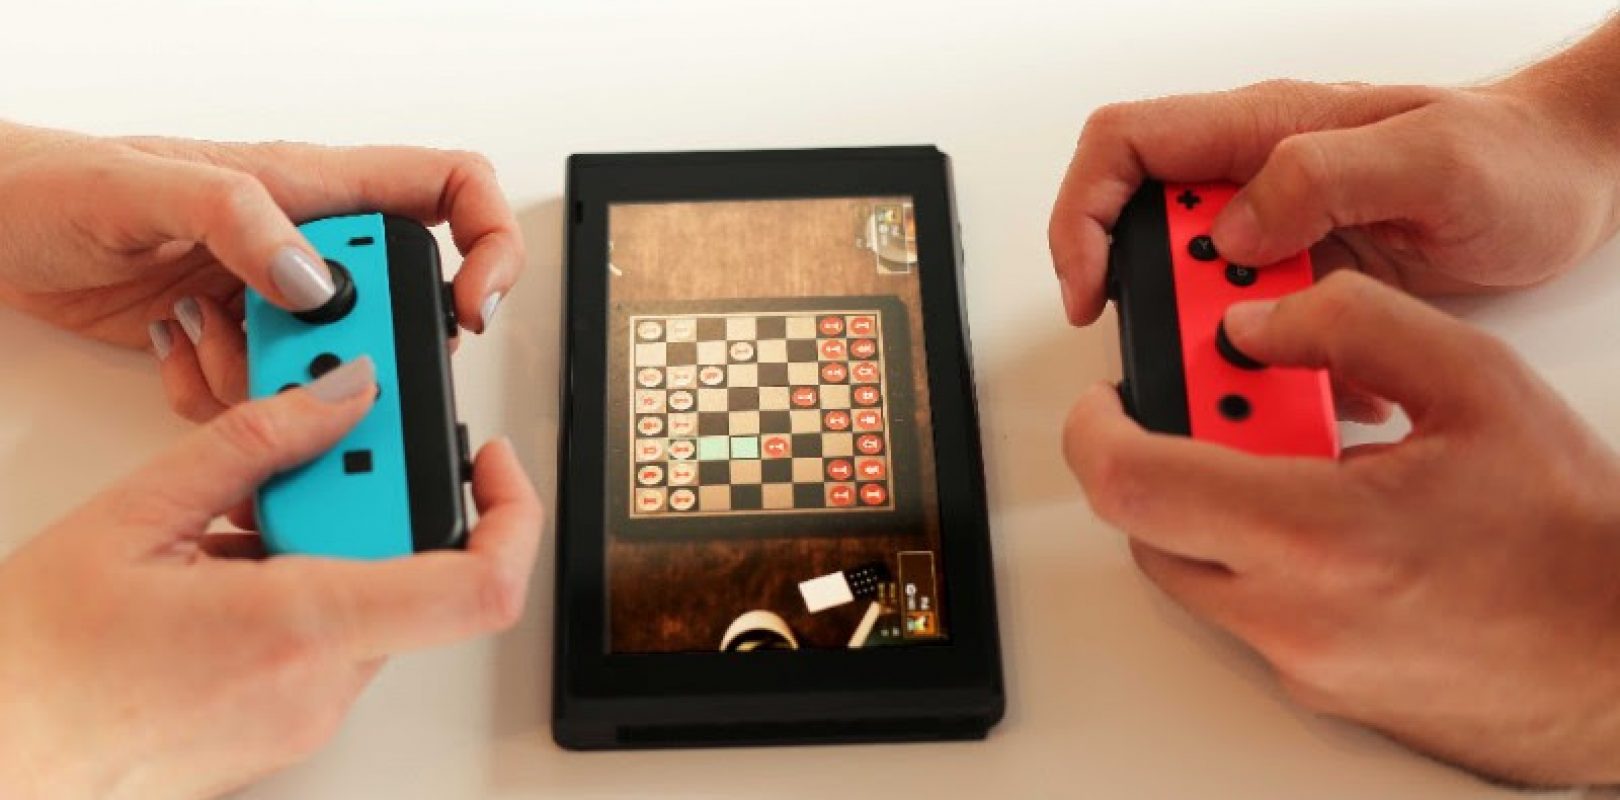 Ripstone Games is releasing Chess Ultra for Switch on November 2nd